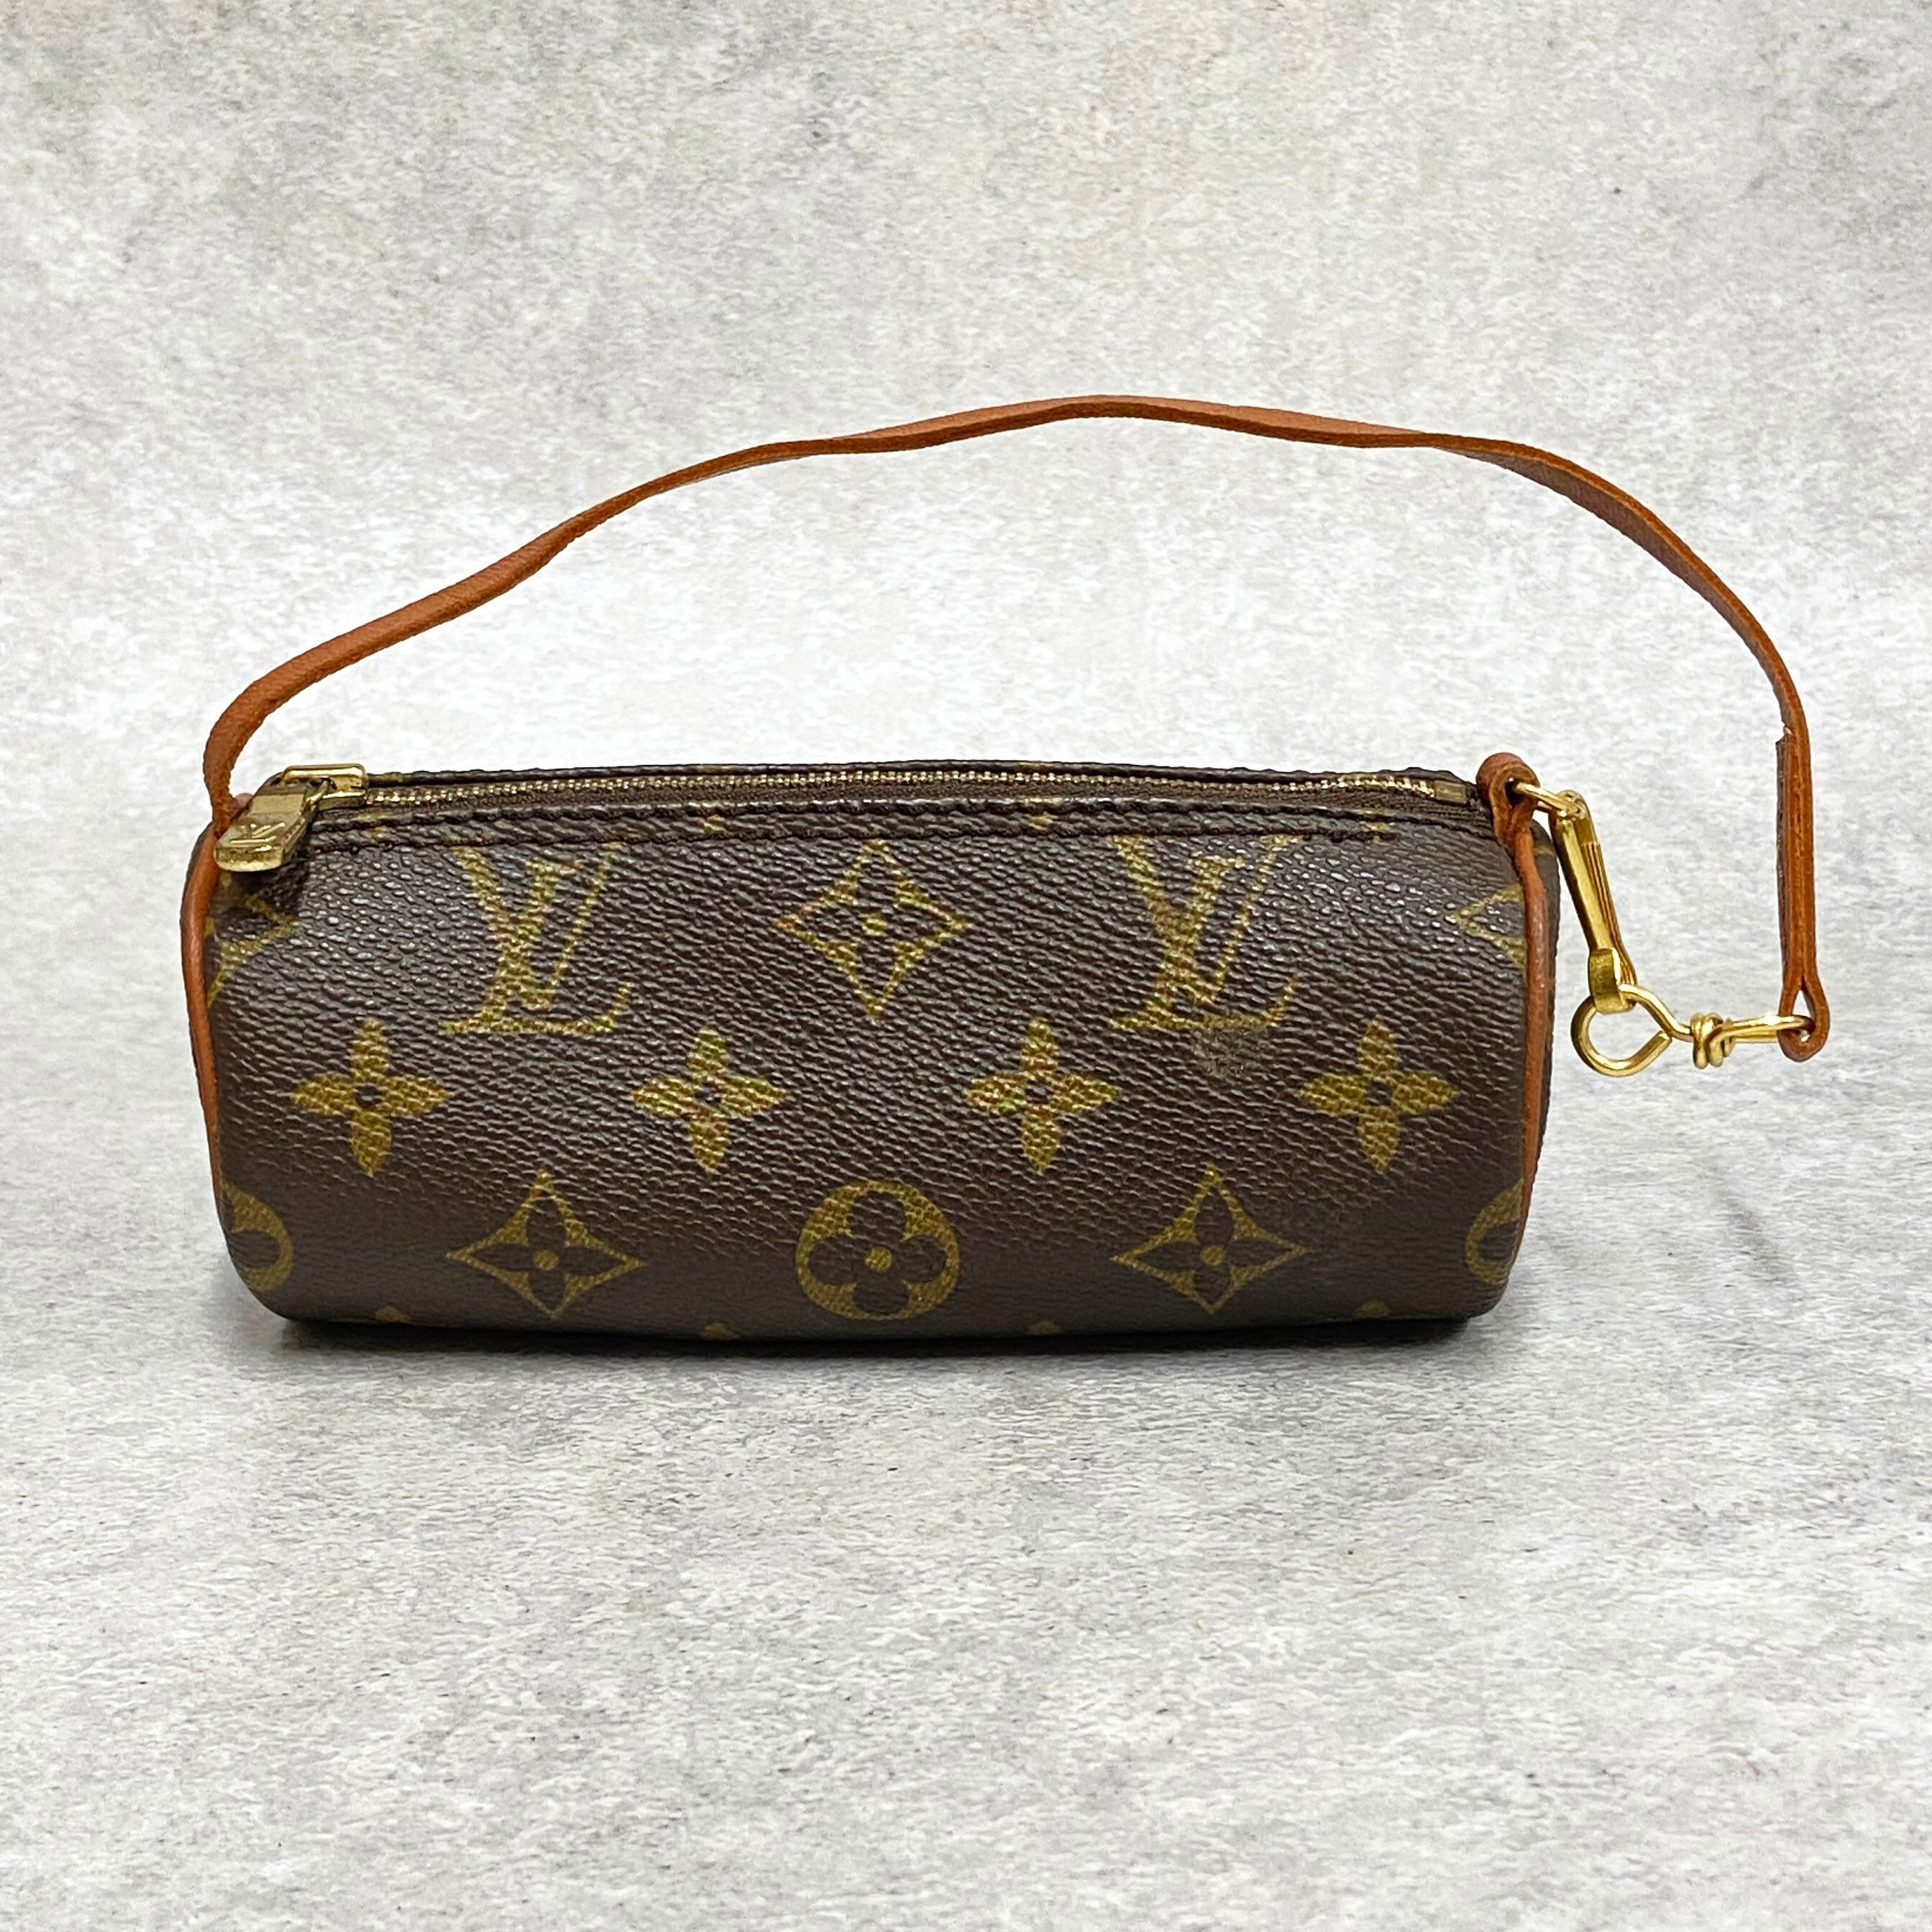 Reserved items※ LOUIS VUITTON ルイ・ヴィトン モノグラム パピヨン用